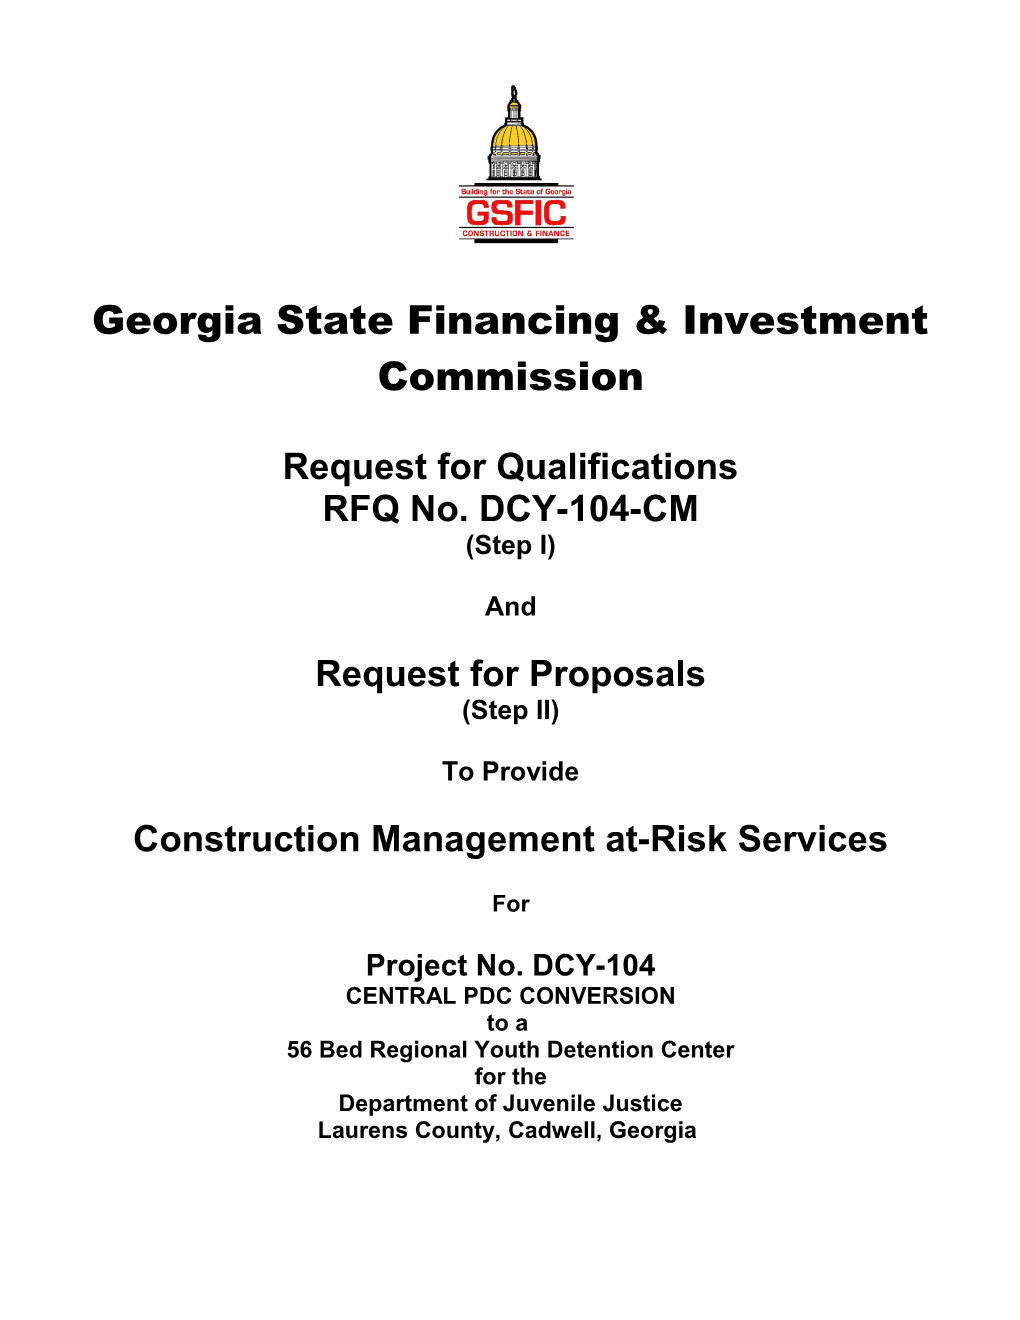 Georgia State Financing & Investment Commission